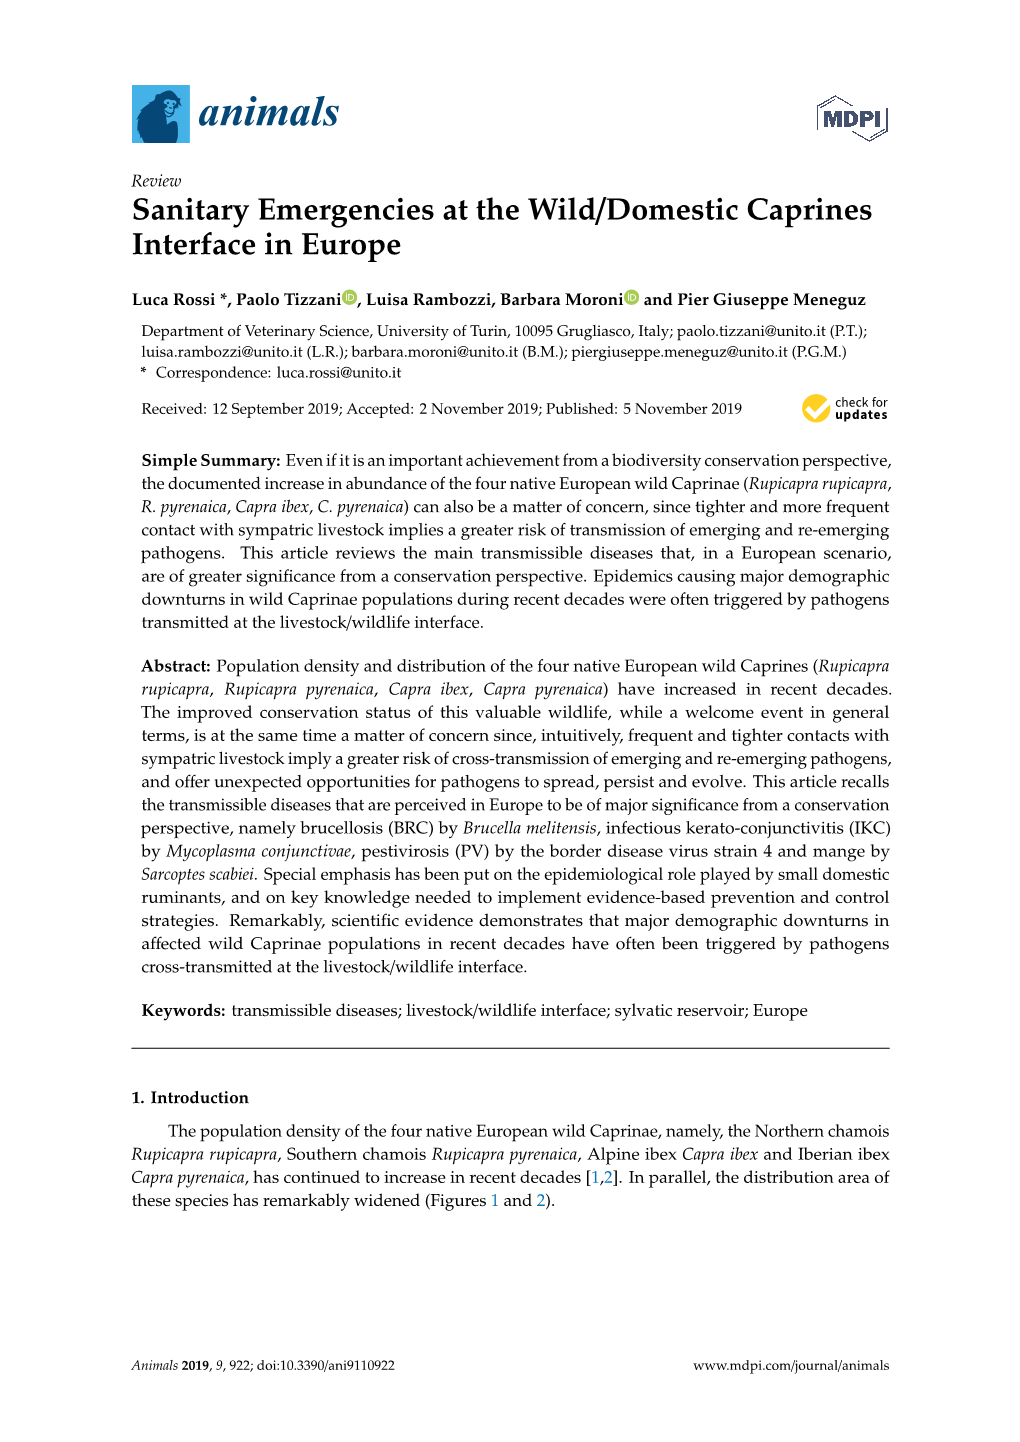 Sanitary Emergencies at the Wild/Domestic Caprines Interface in Europe